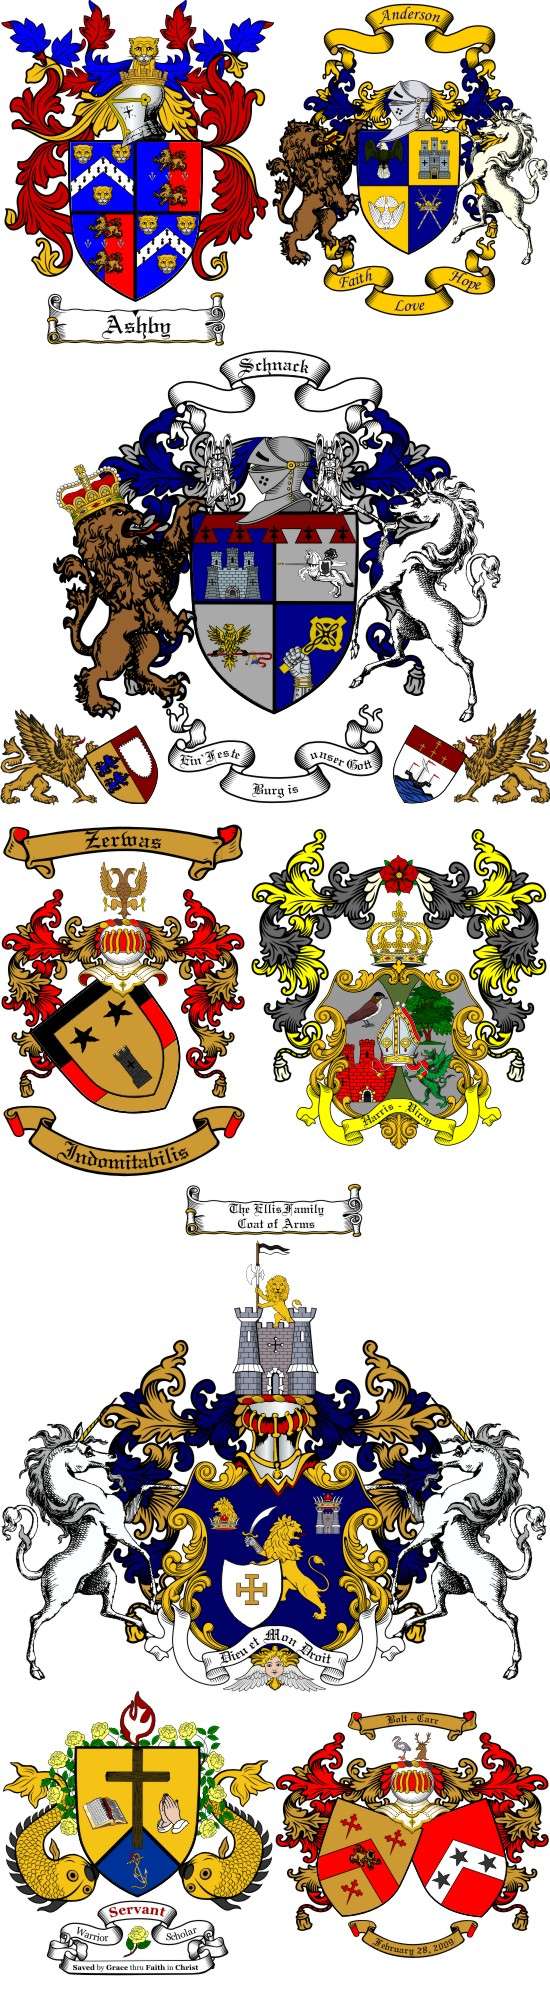 Personal or Family Coat of Arms Samples